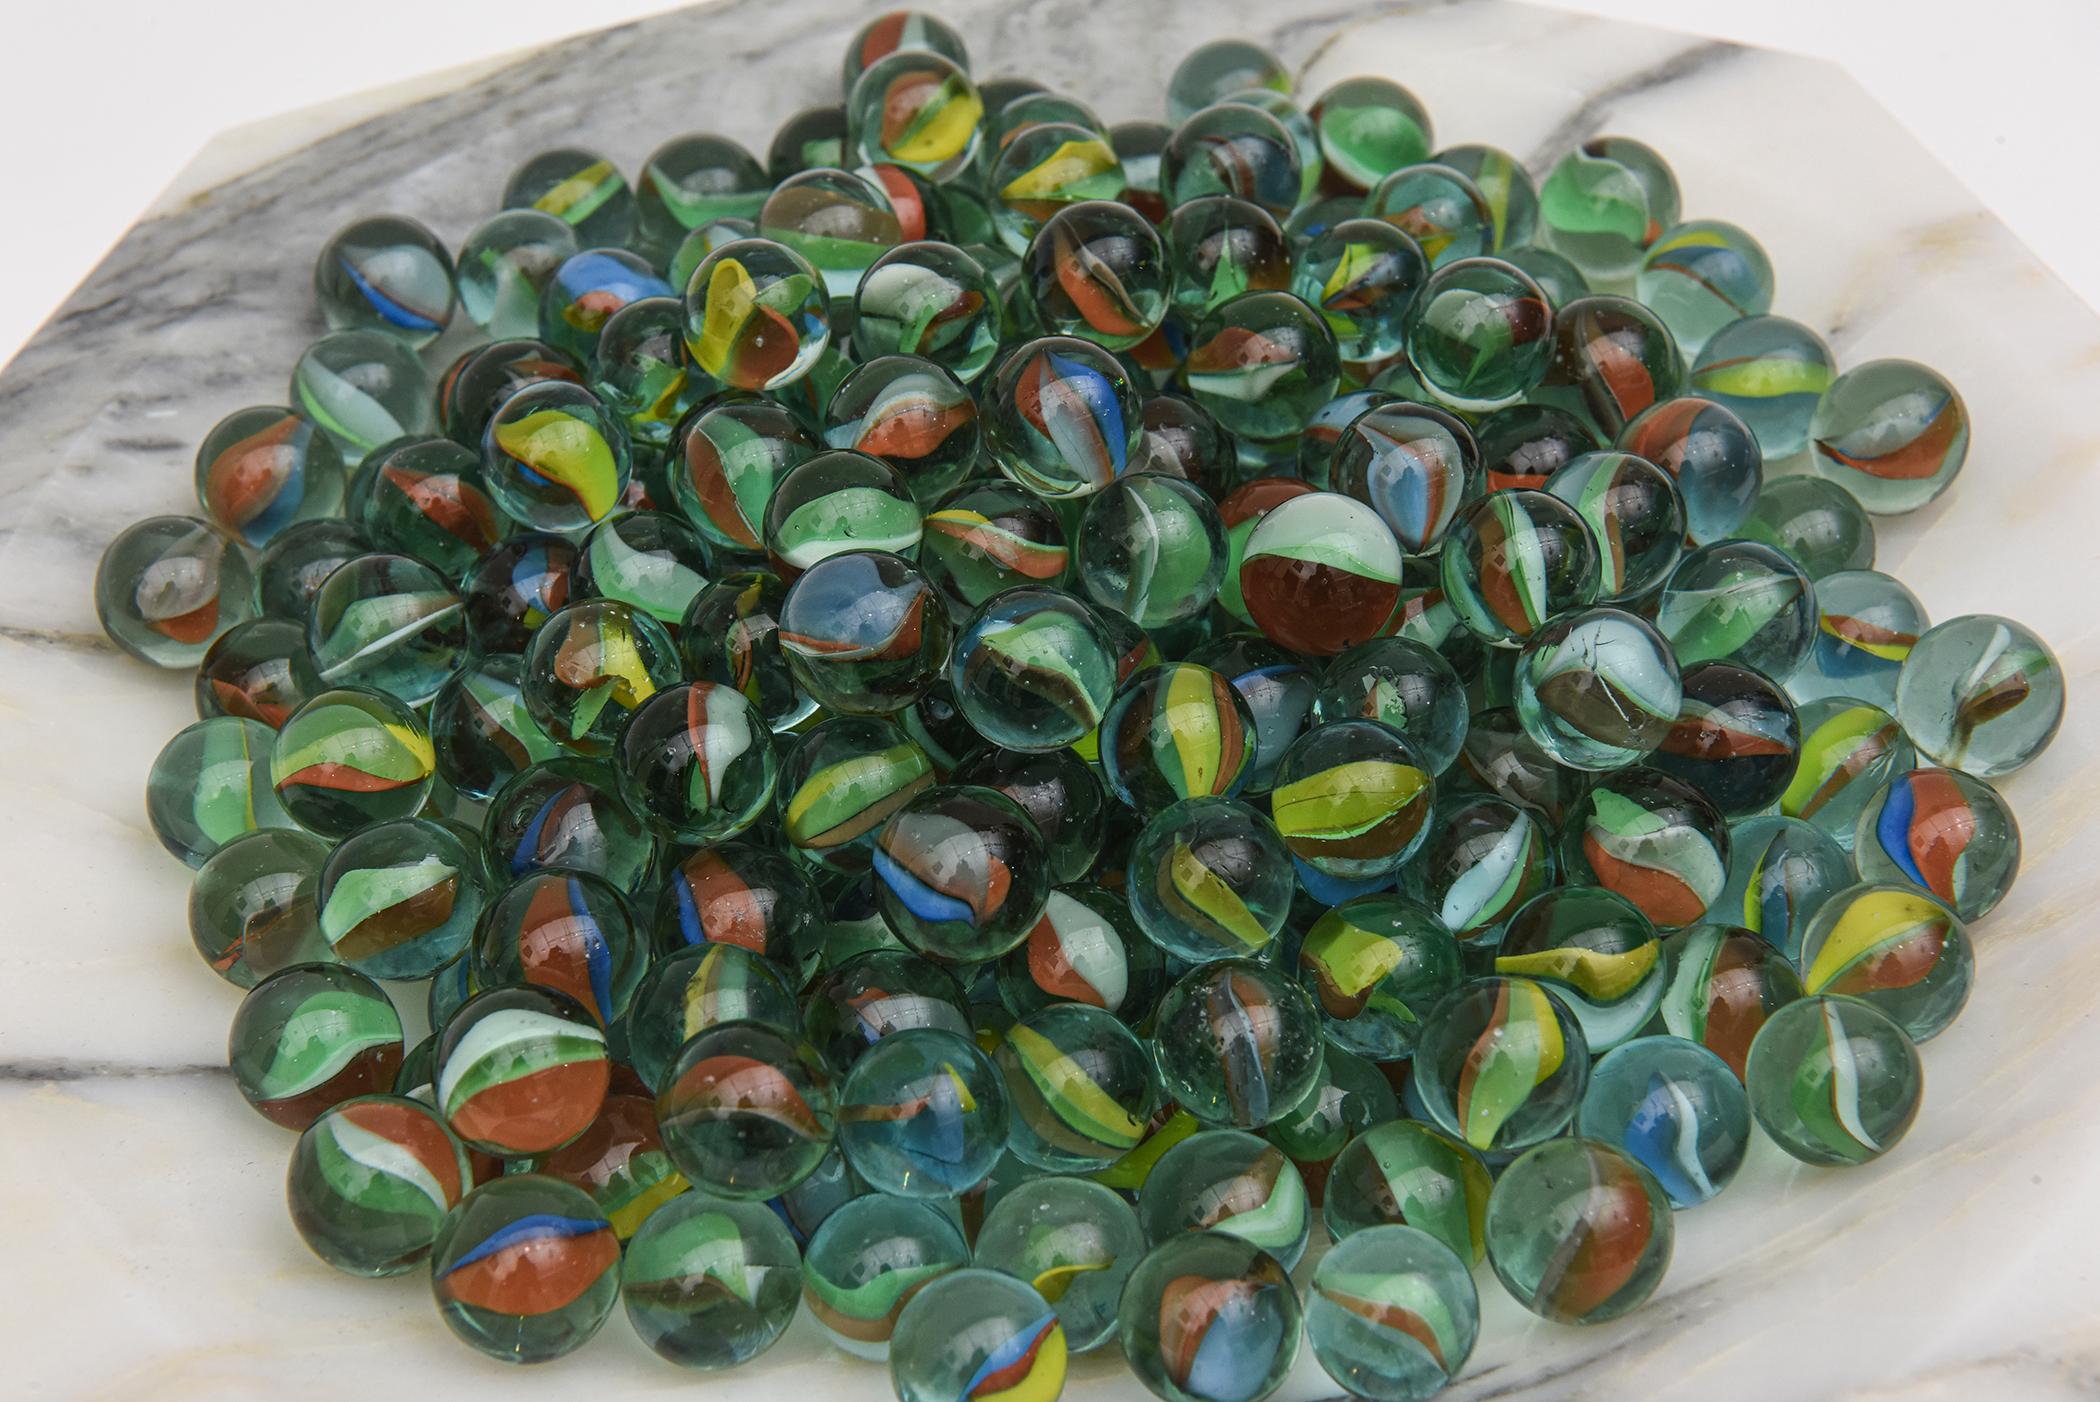  Cats Eye Glass Marbles Collection of 234 Mid Century Modern 1